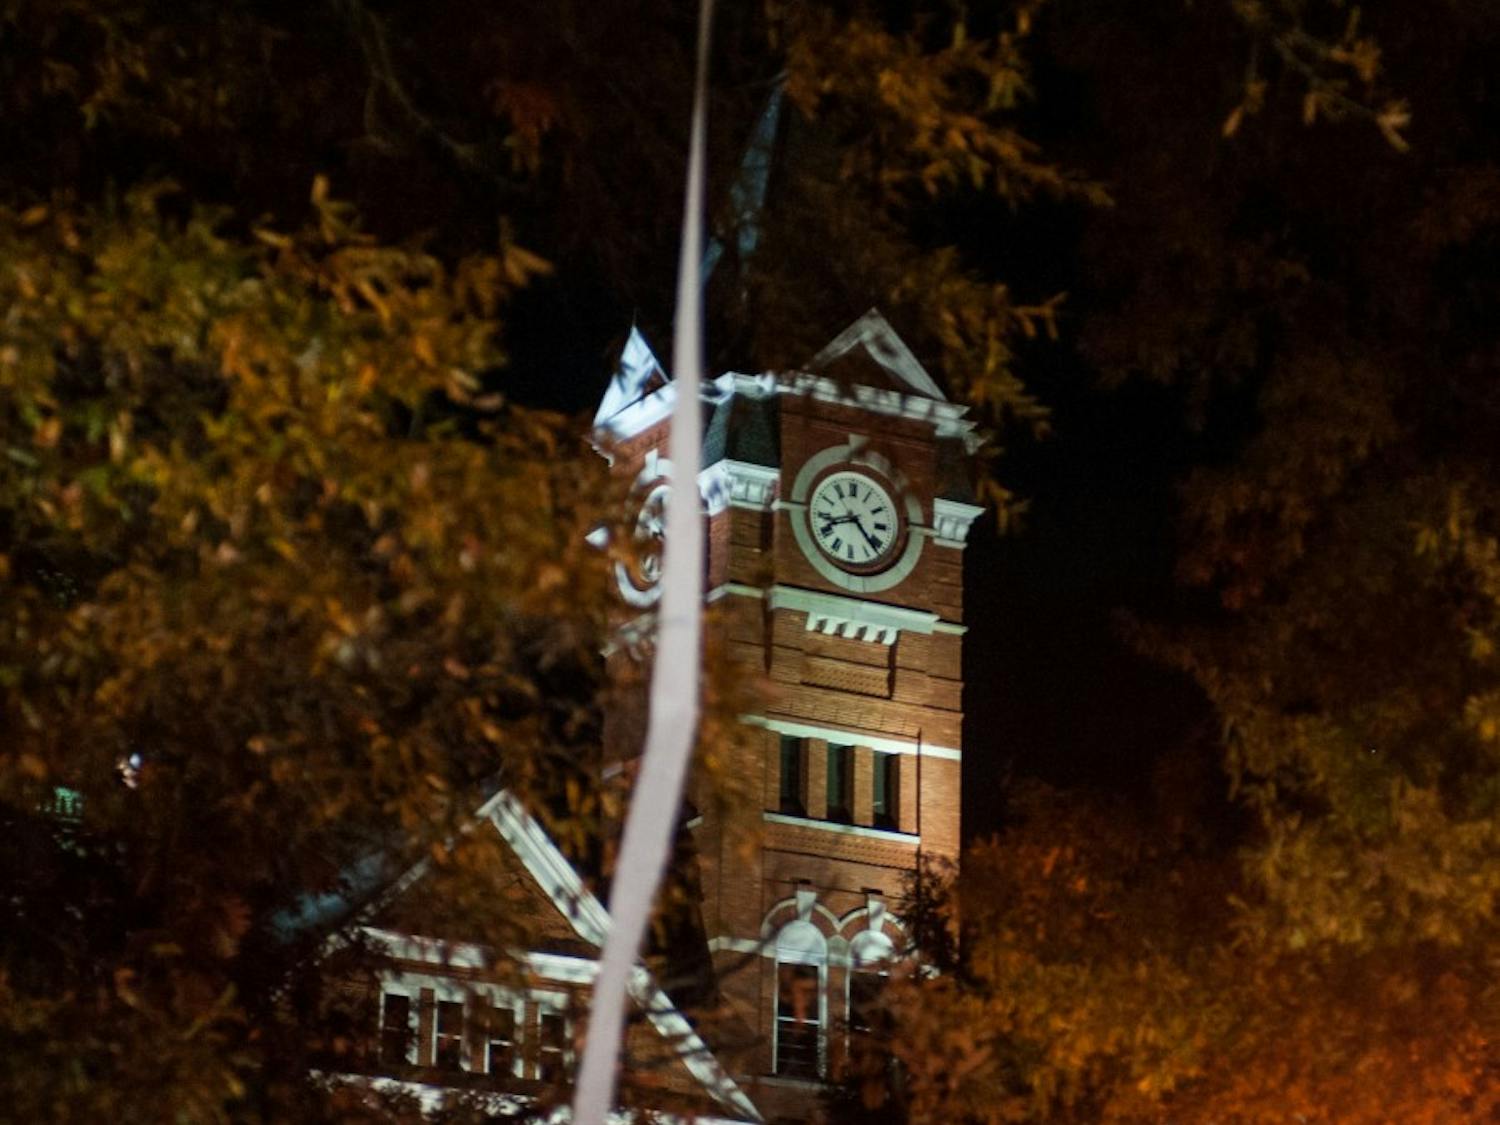 A single strand of toilet paper hangs from a tree in front of Samford Hall. Auburn vs Alabama on Saturday, Nov. 25 in Auburn, Ala.